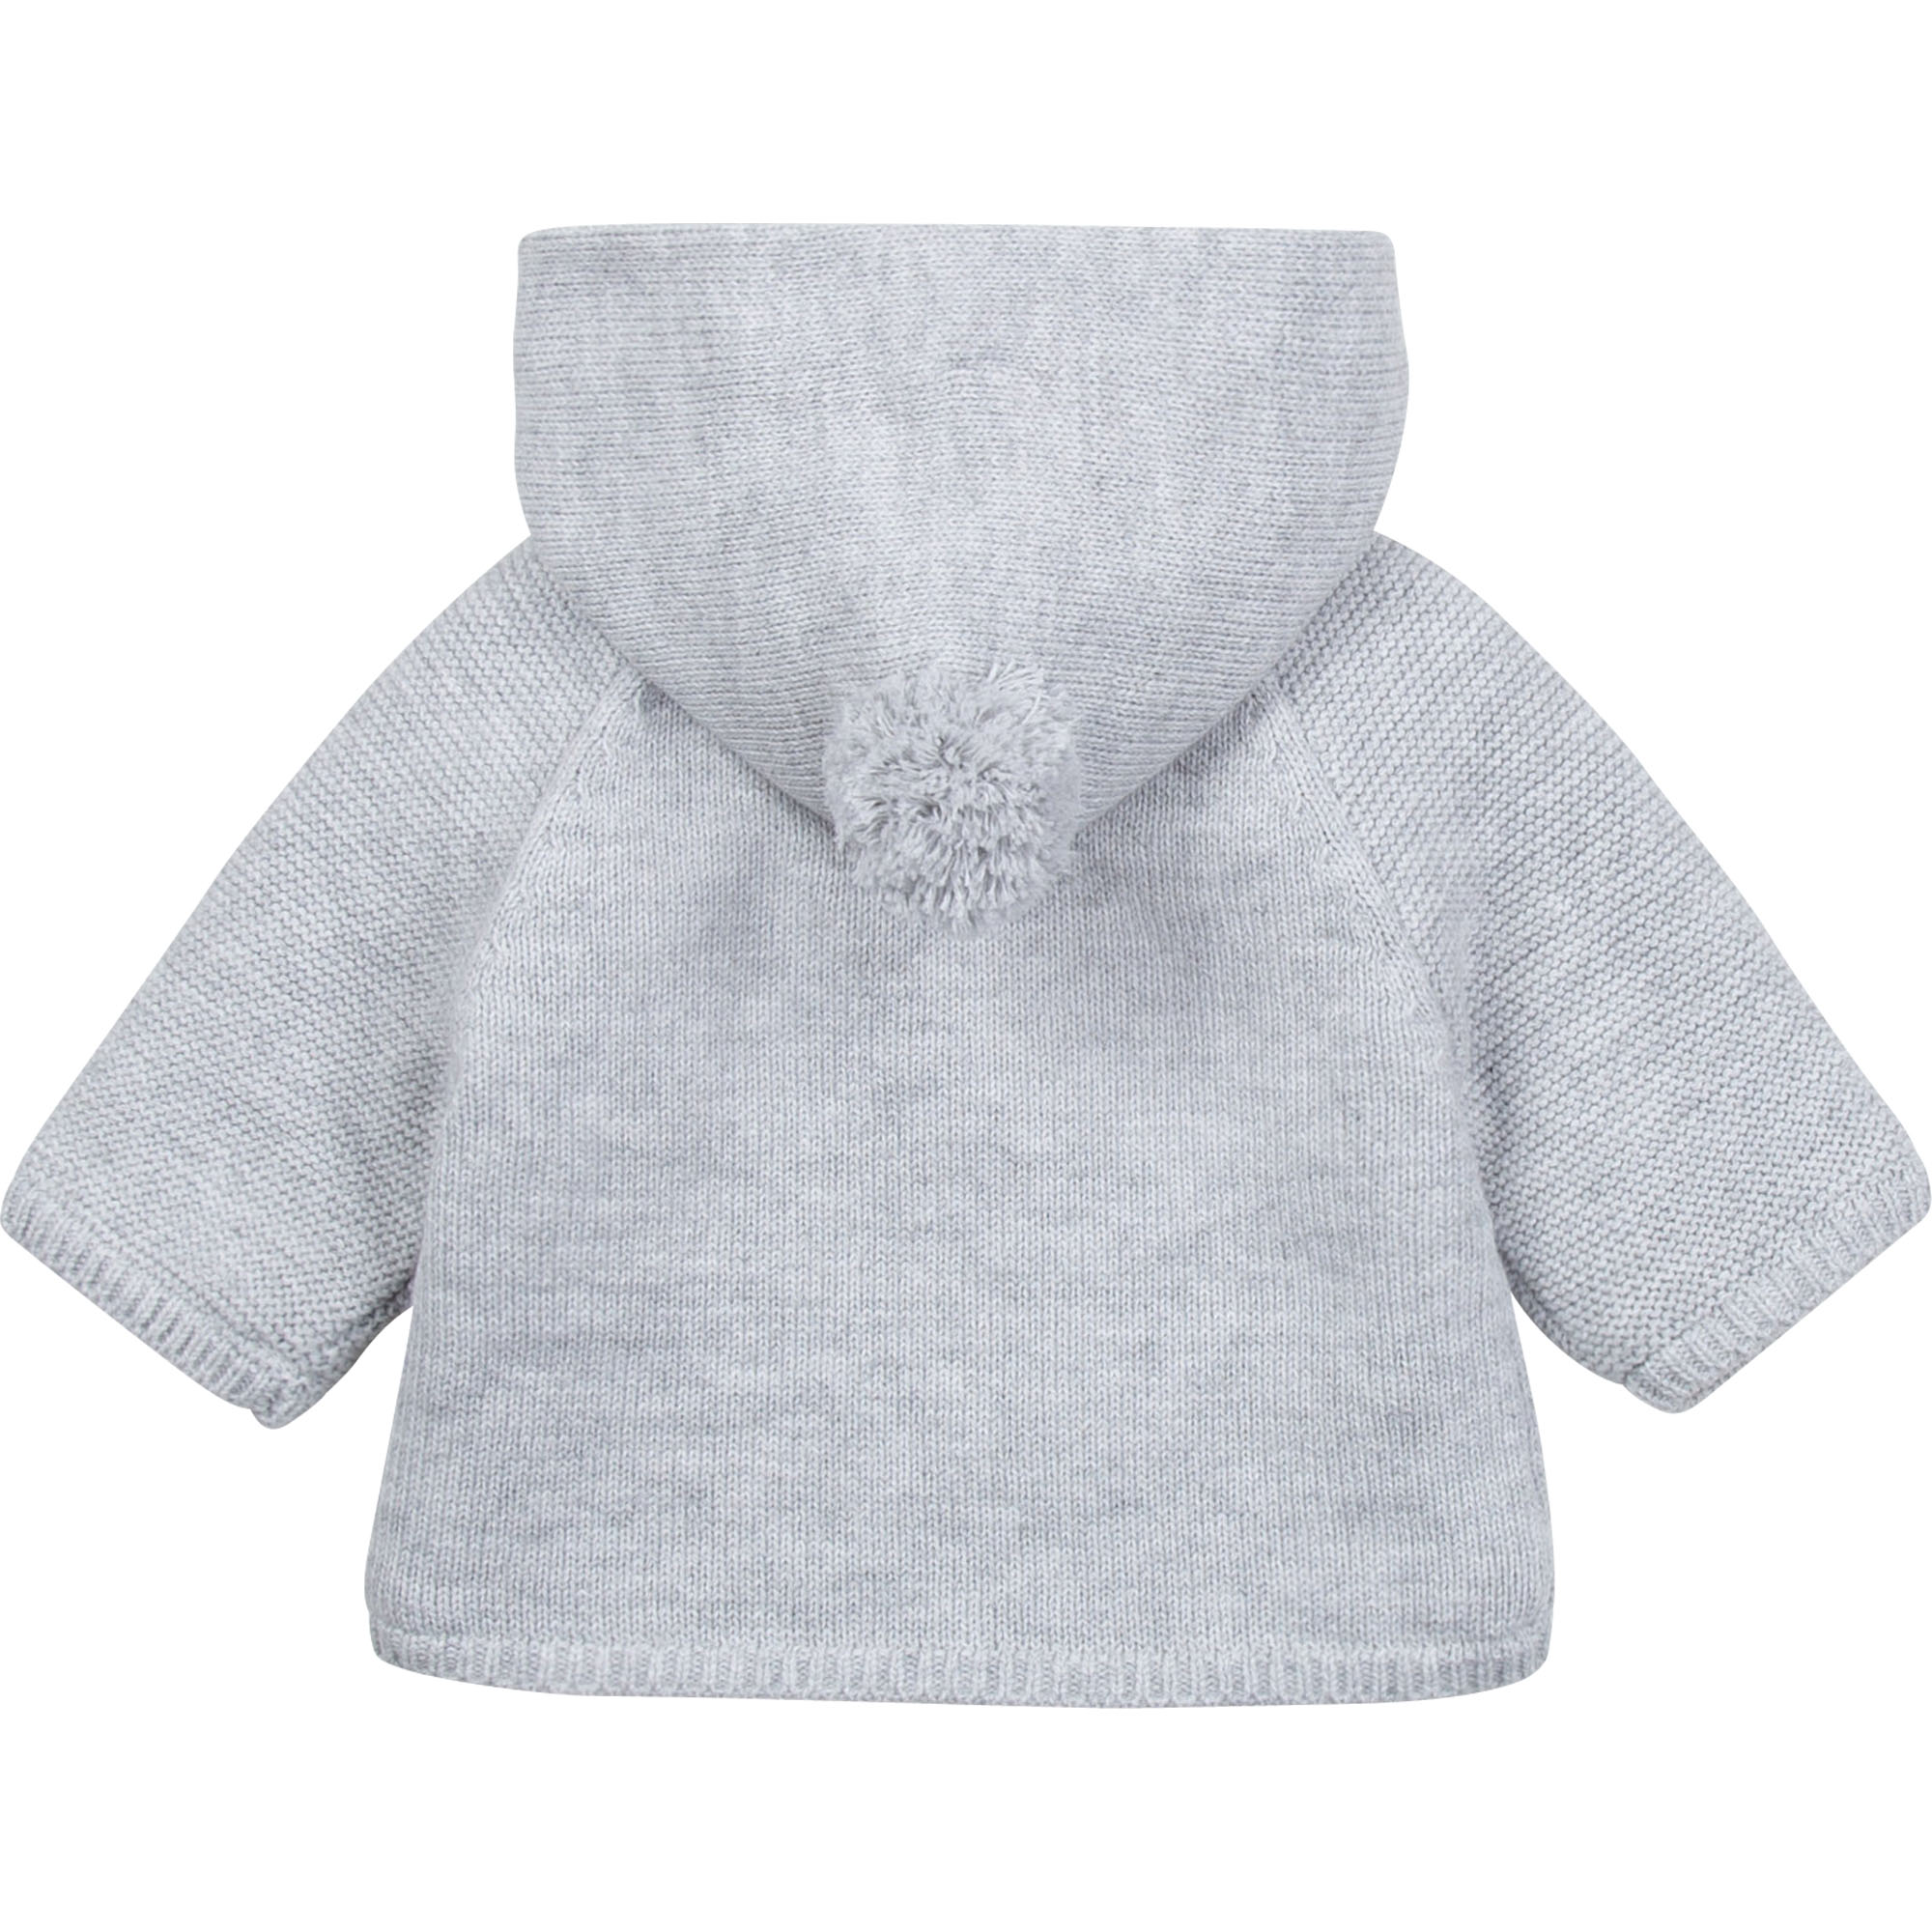 Knitted hooded coat CARREMENT BEAU for BOY